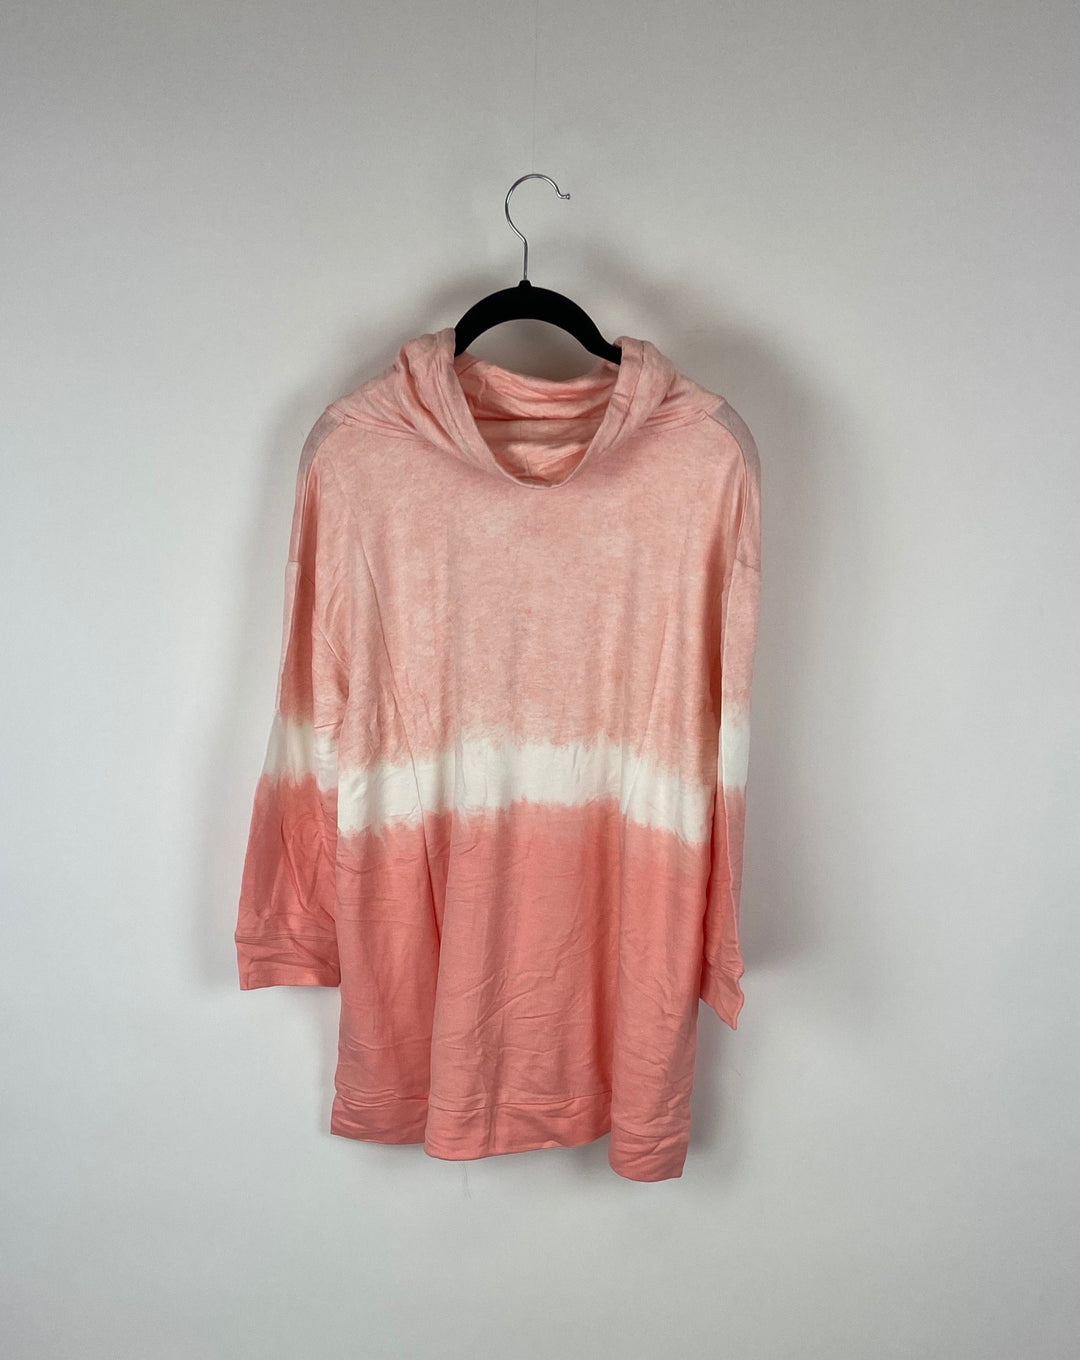 Pink Mock Neck Long Sleeved Top - Small